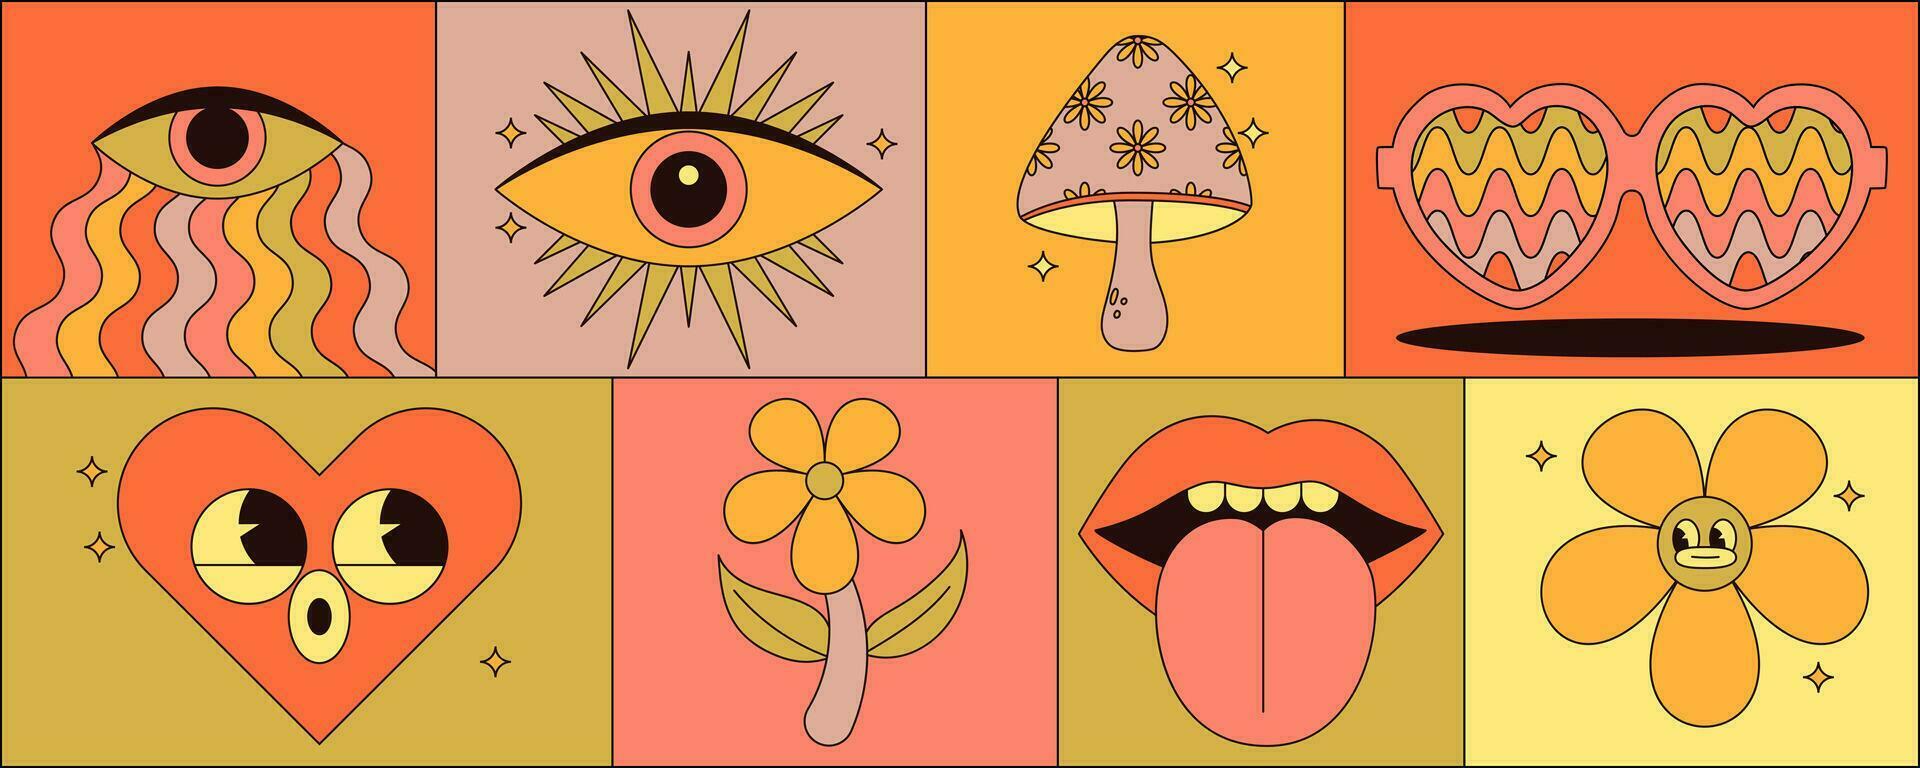 Groovy hippie sticker set with trippy mushrooms, flower, lips, eyes, sunglasses and more. Vintage vector illustrations